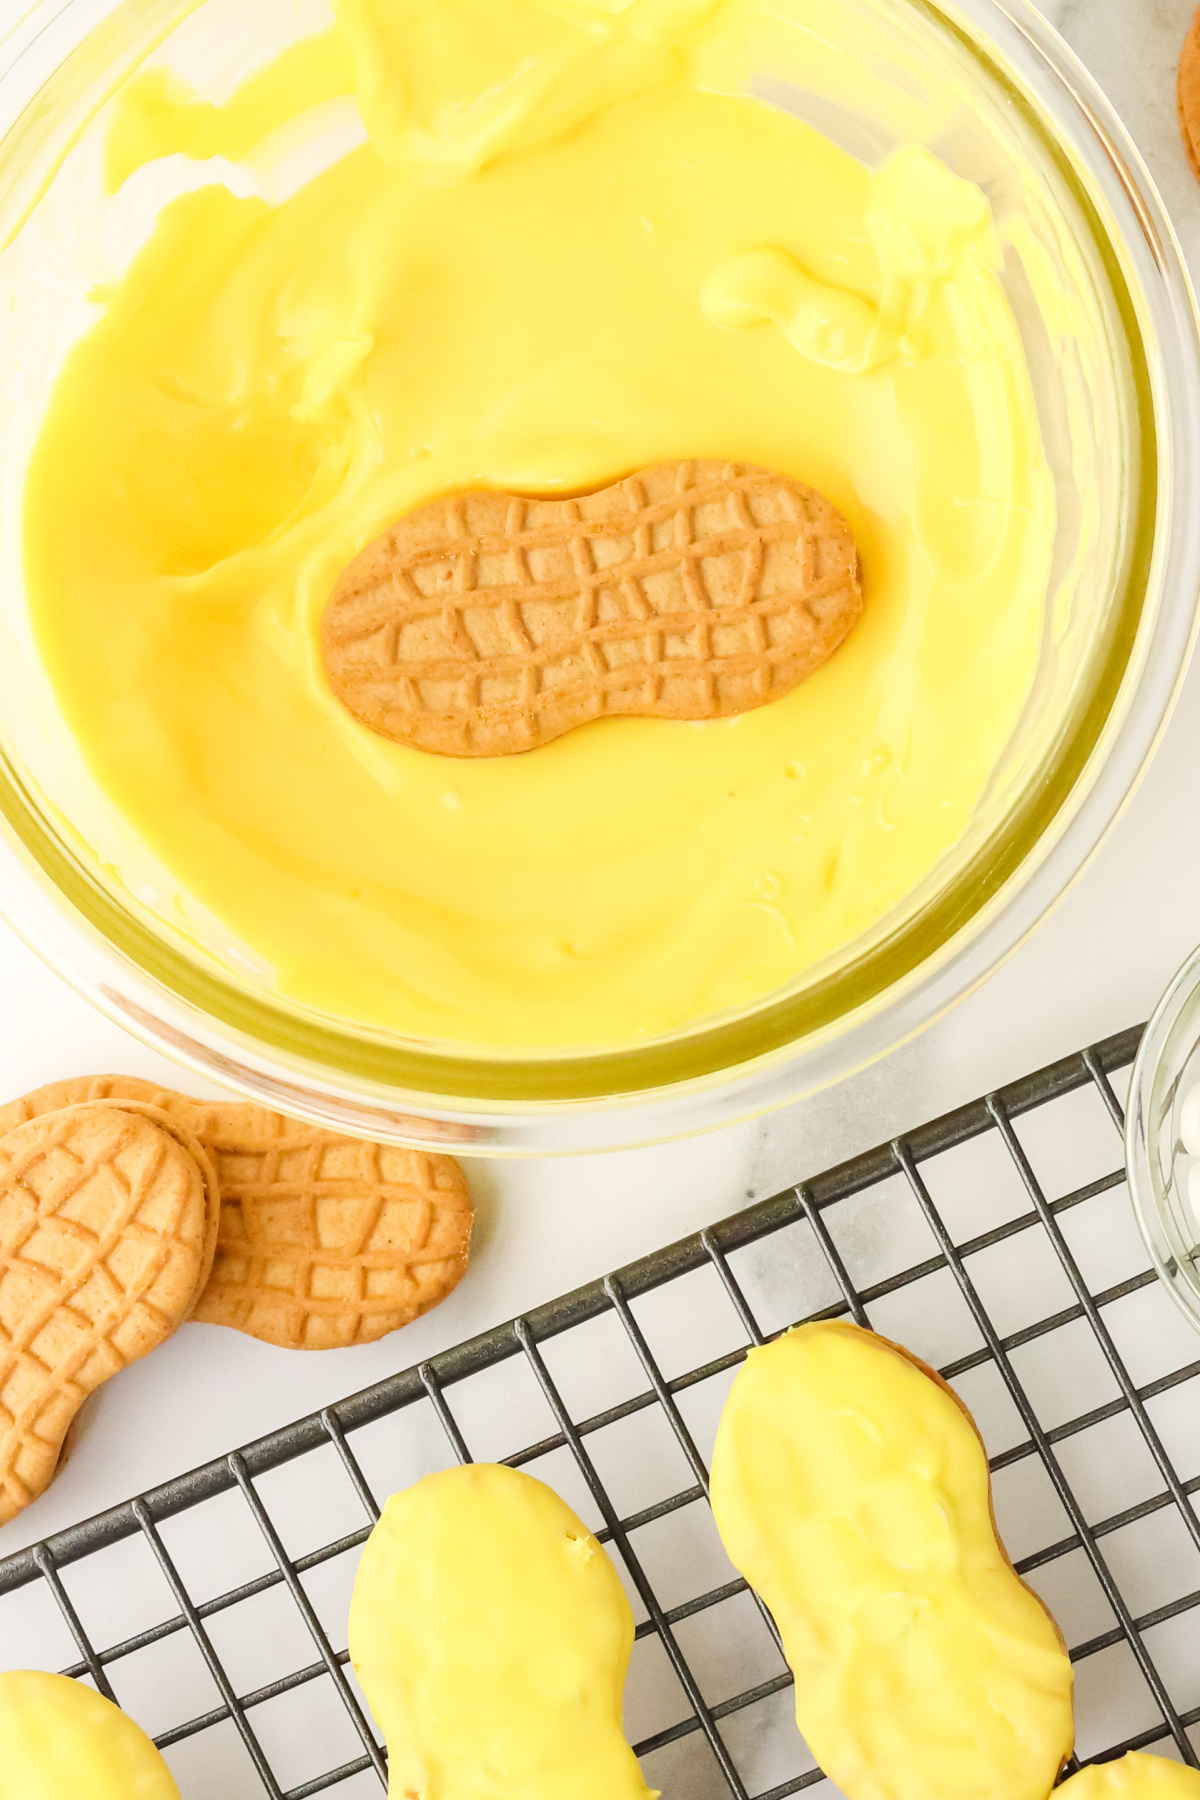 Cookies being dipped in yellow chocolate and placed on a cooling rack.